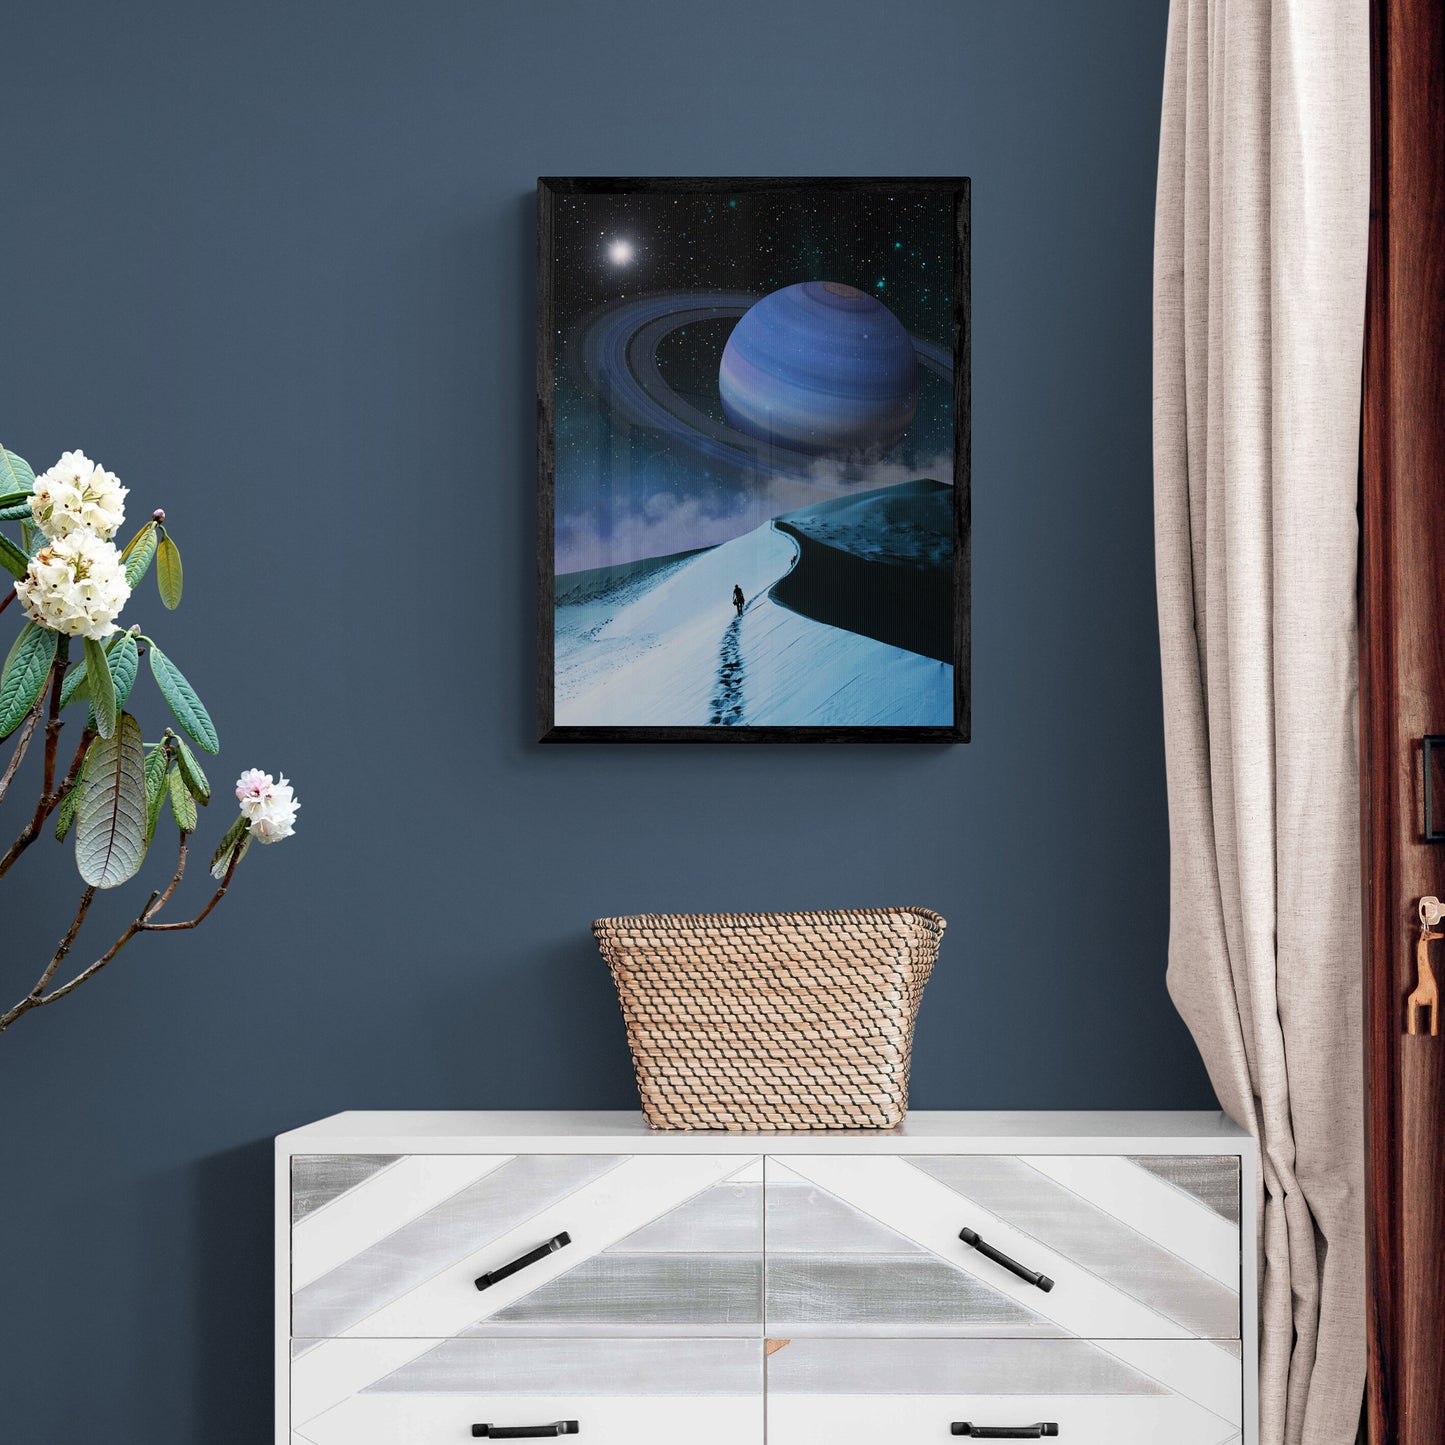 Blue Saturn Hike 18X24 Inch Poster Print for Space Art & Saturn fans, great gift for home decor and room design.